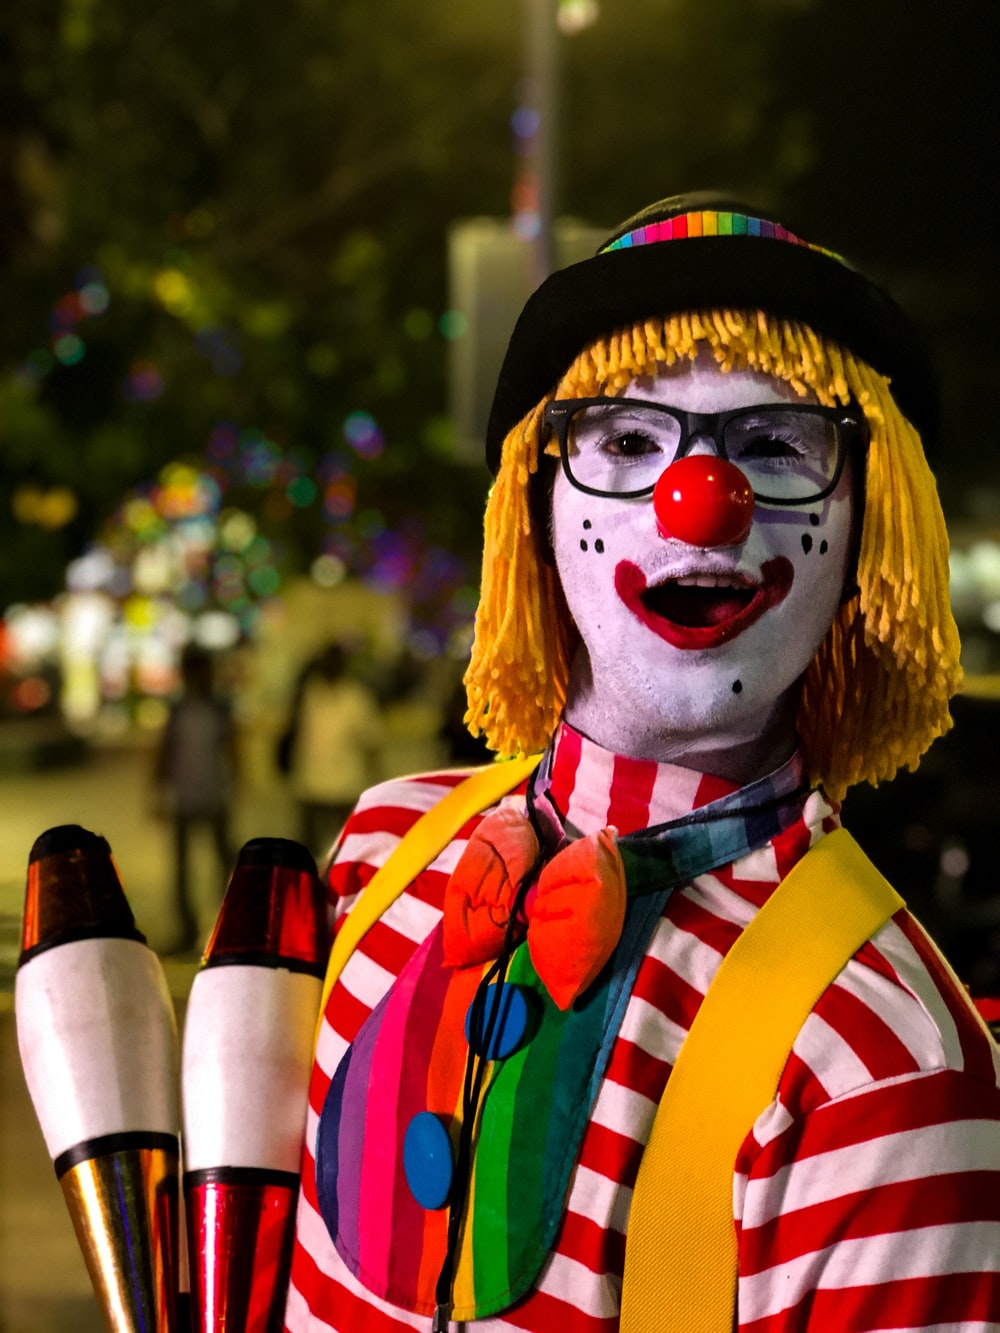 Clowns Picture. Download Free Image